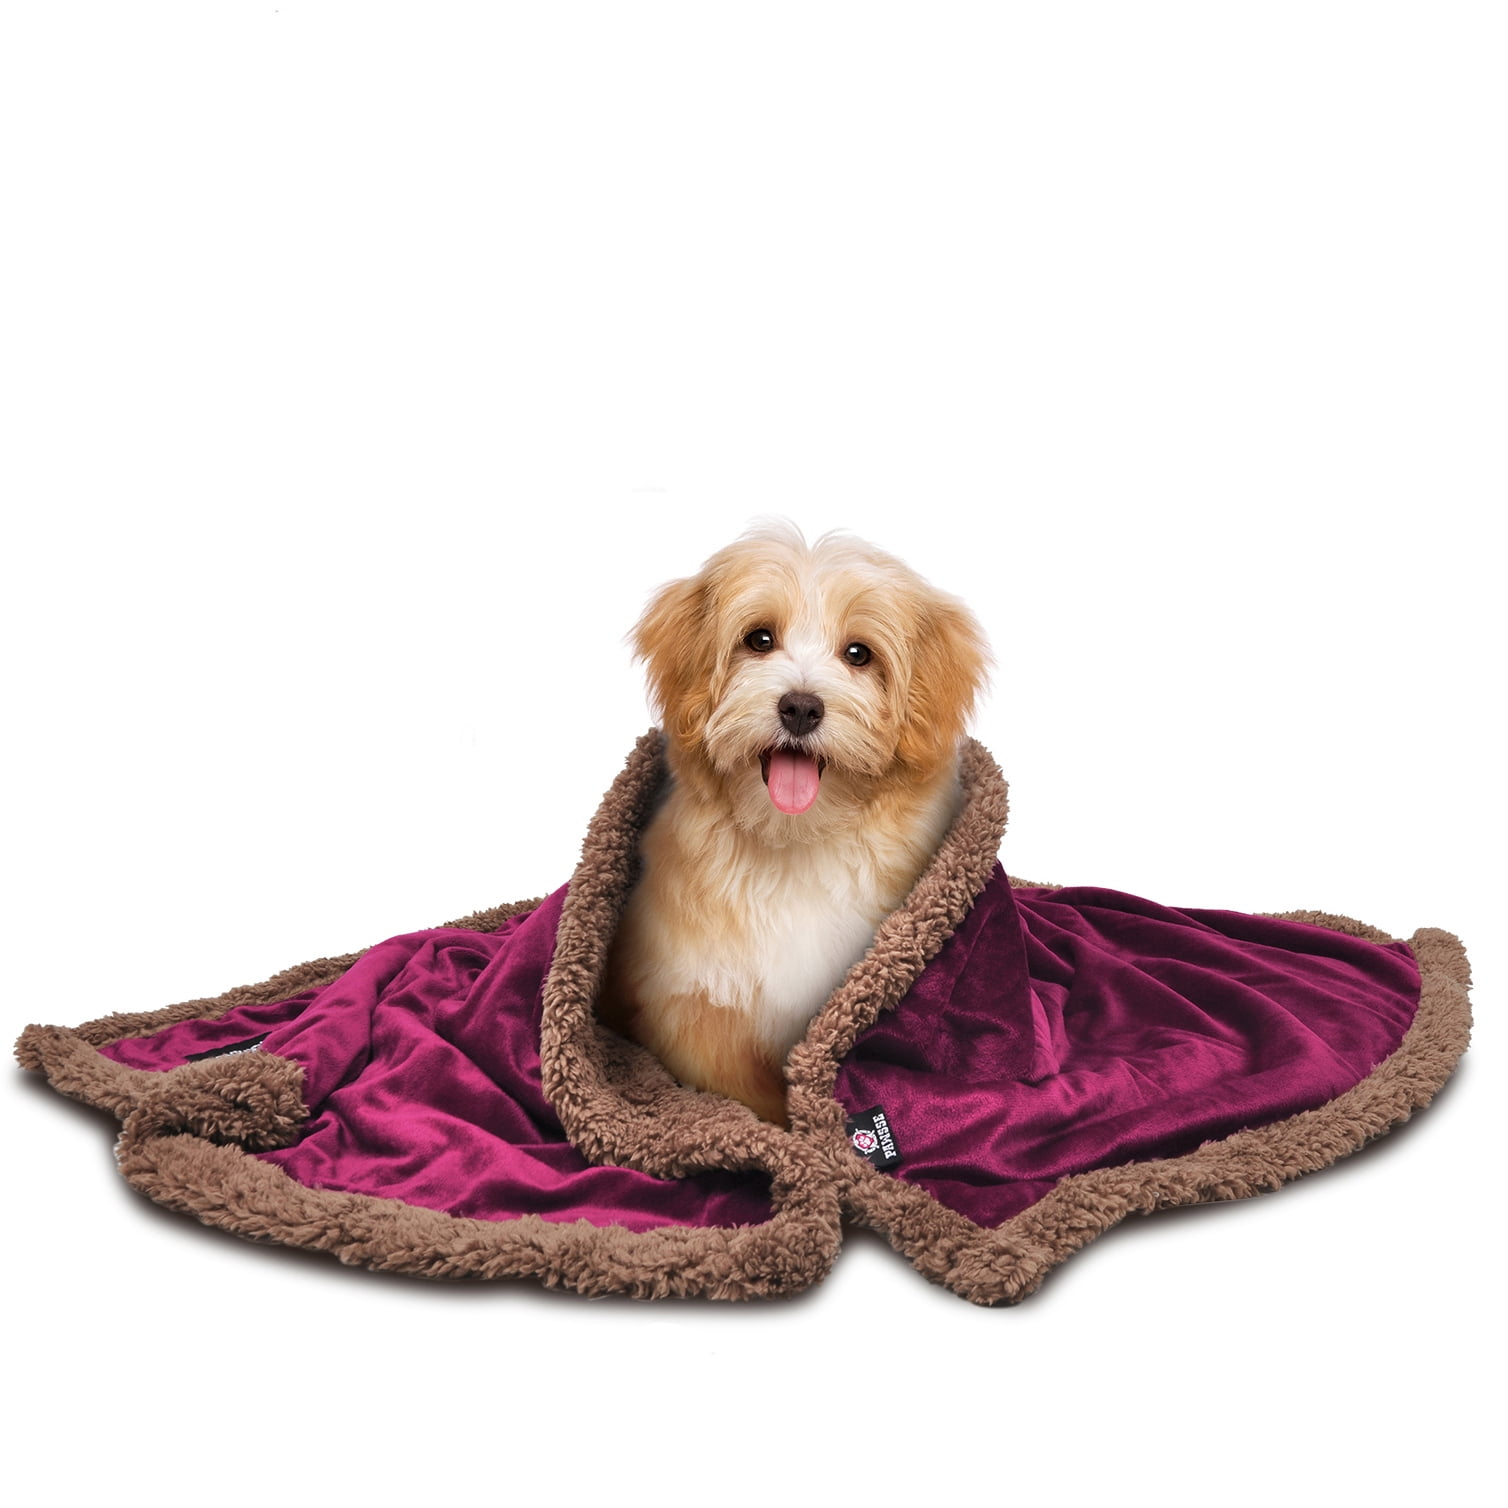 Pawsse Dog Blanket,Super Soft Sherpa Pet Blankets and Throws Sleeping Mat for Small Medium Doggies Puppy Animals 45x30